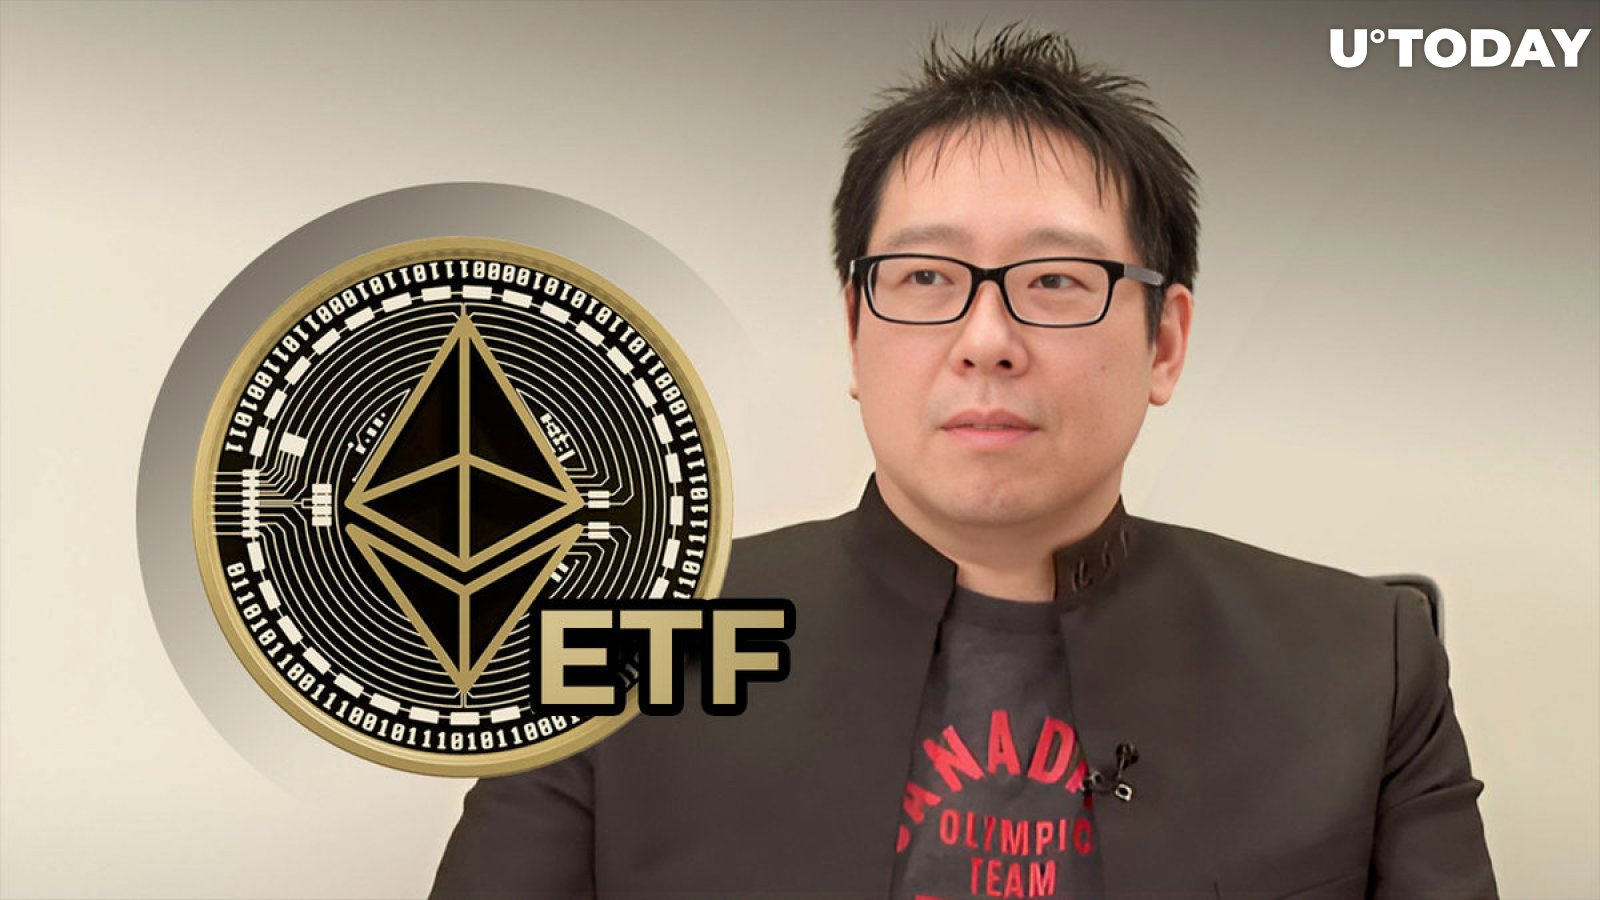 Crucial Negative Ethereum ETF Statement Made by Samson Mow, Here's His Message